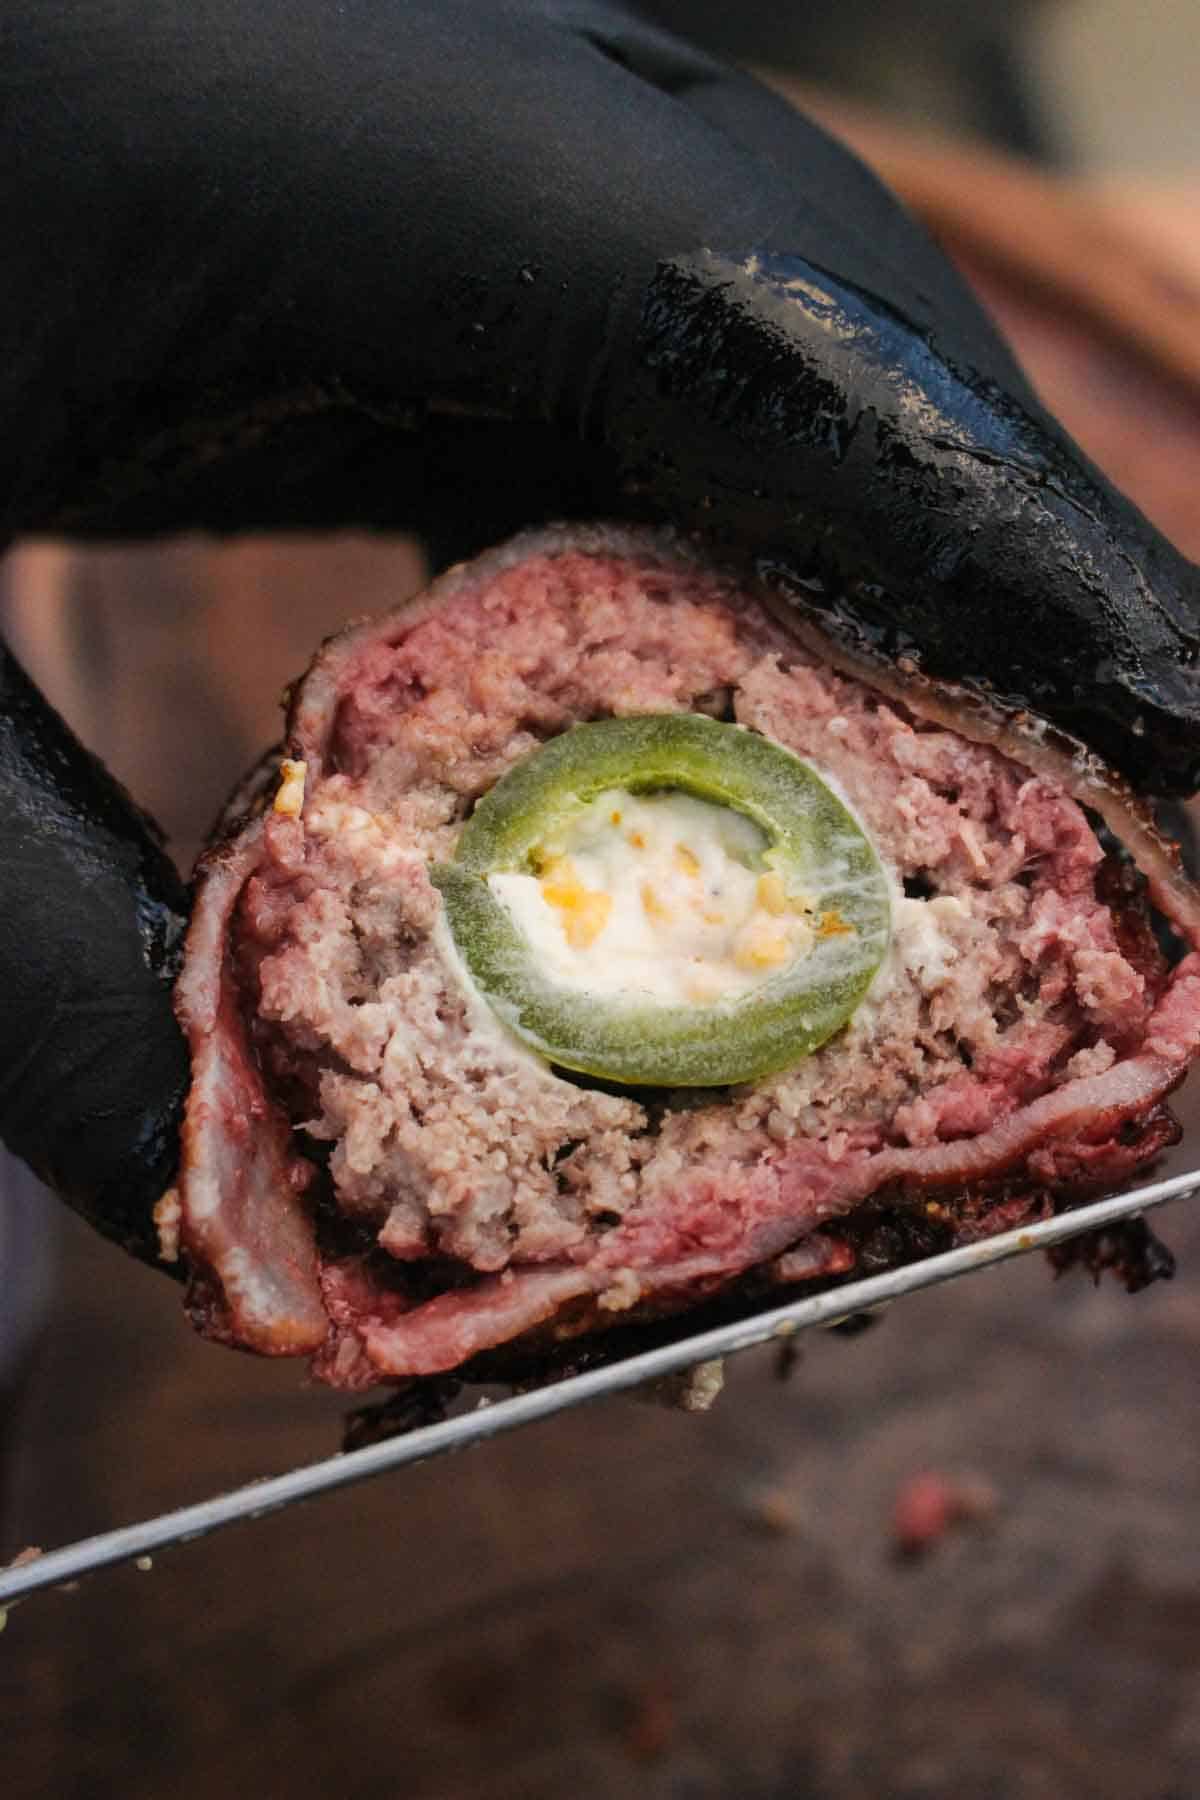 A sliced beef armadillo egg held up for the camera.